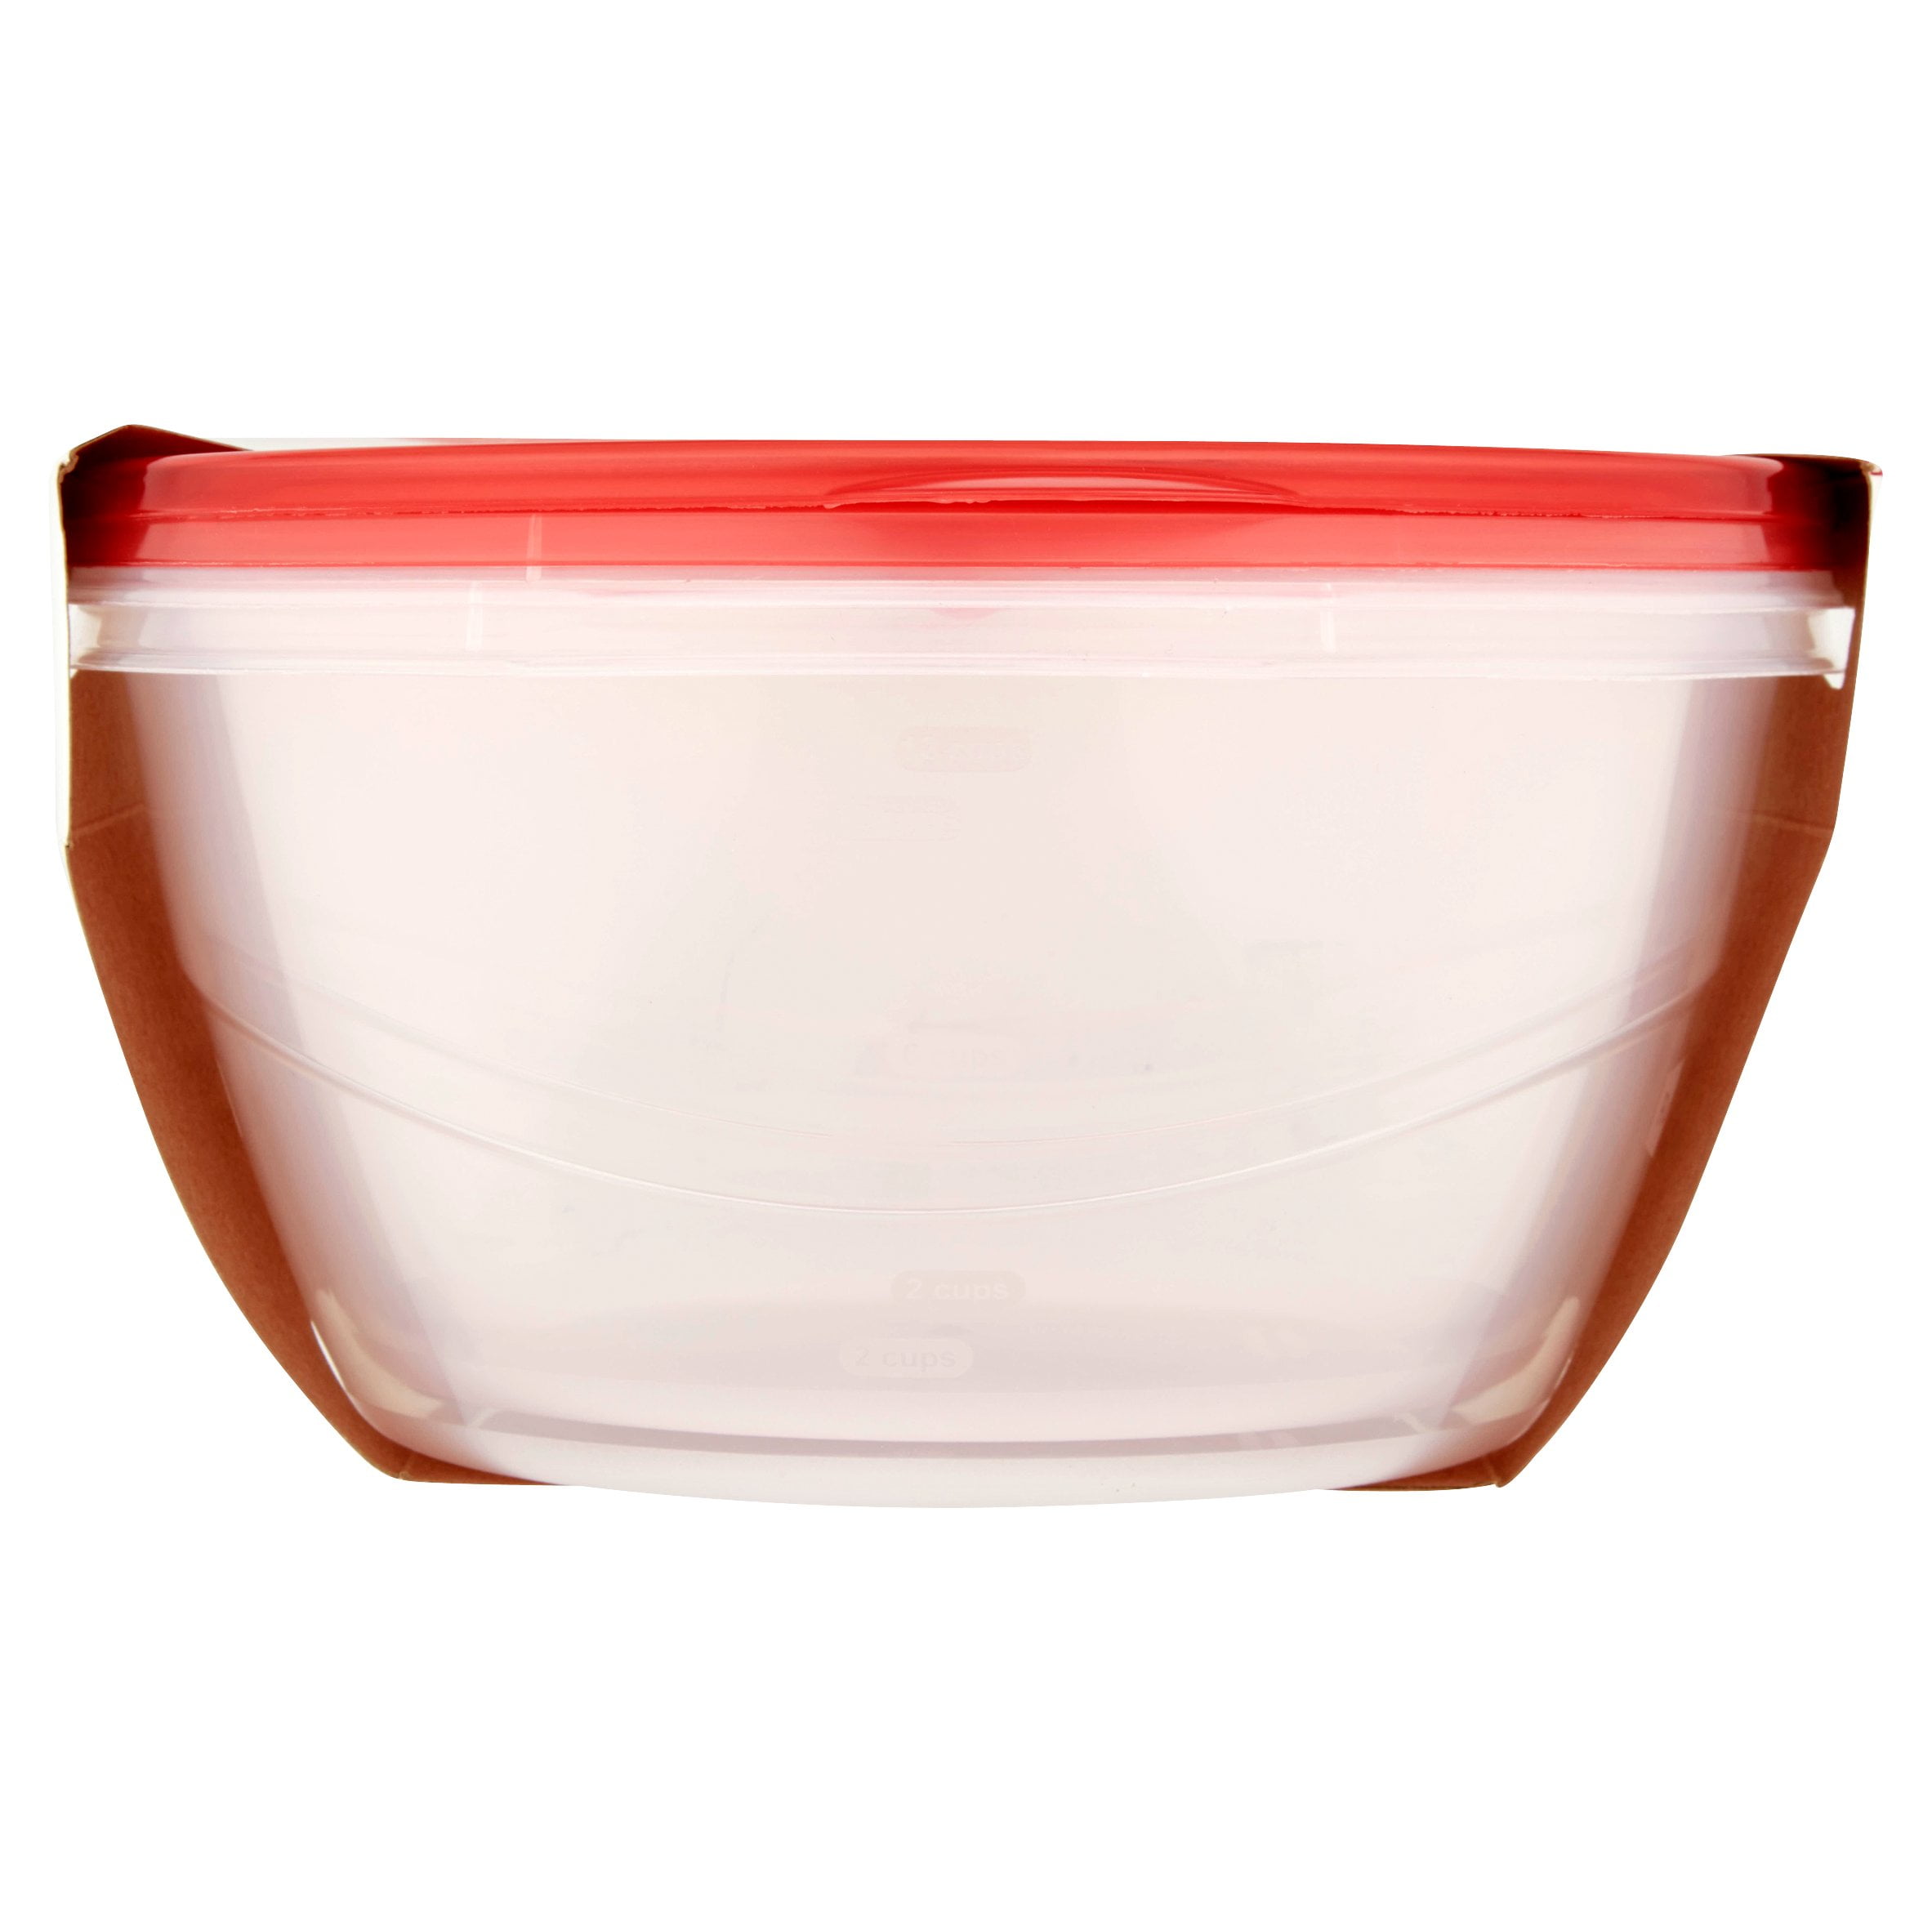  Rubbermaid Take Alongs Large Round Storage Container (Pack of  2) 15.7 Cups / 3.7 L - Red Top